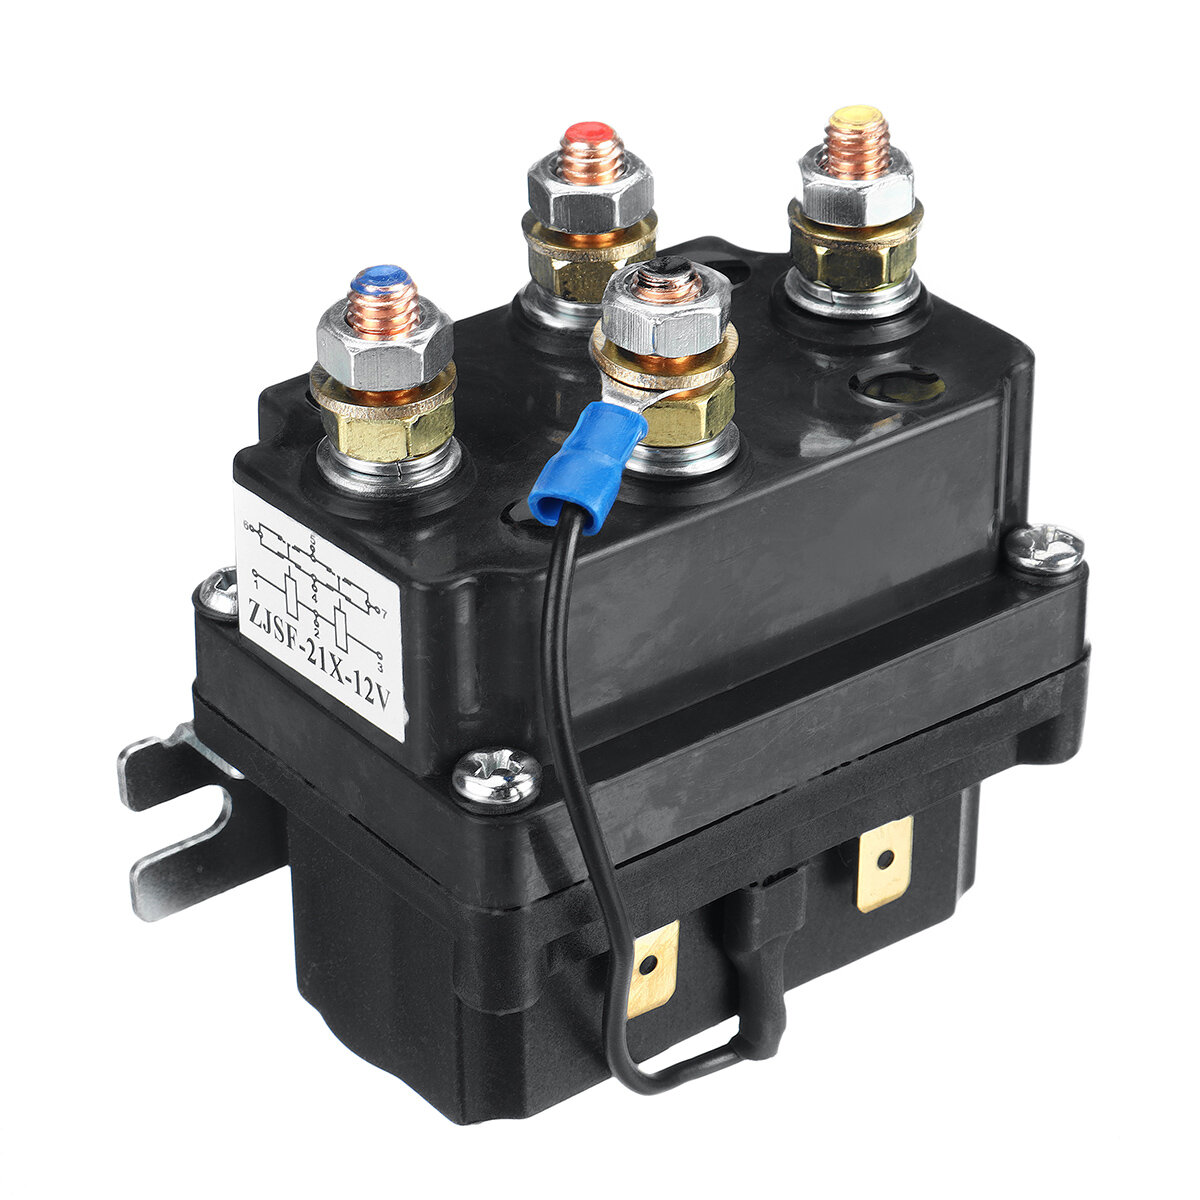 

12V 250A Winch Solenoid/Relay/Control Contactor Thumb Switch For ATV UTV SUVS 2000-5000lbs